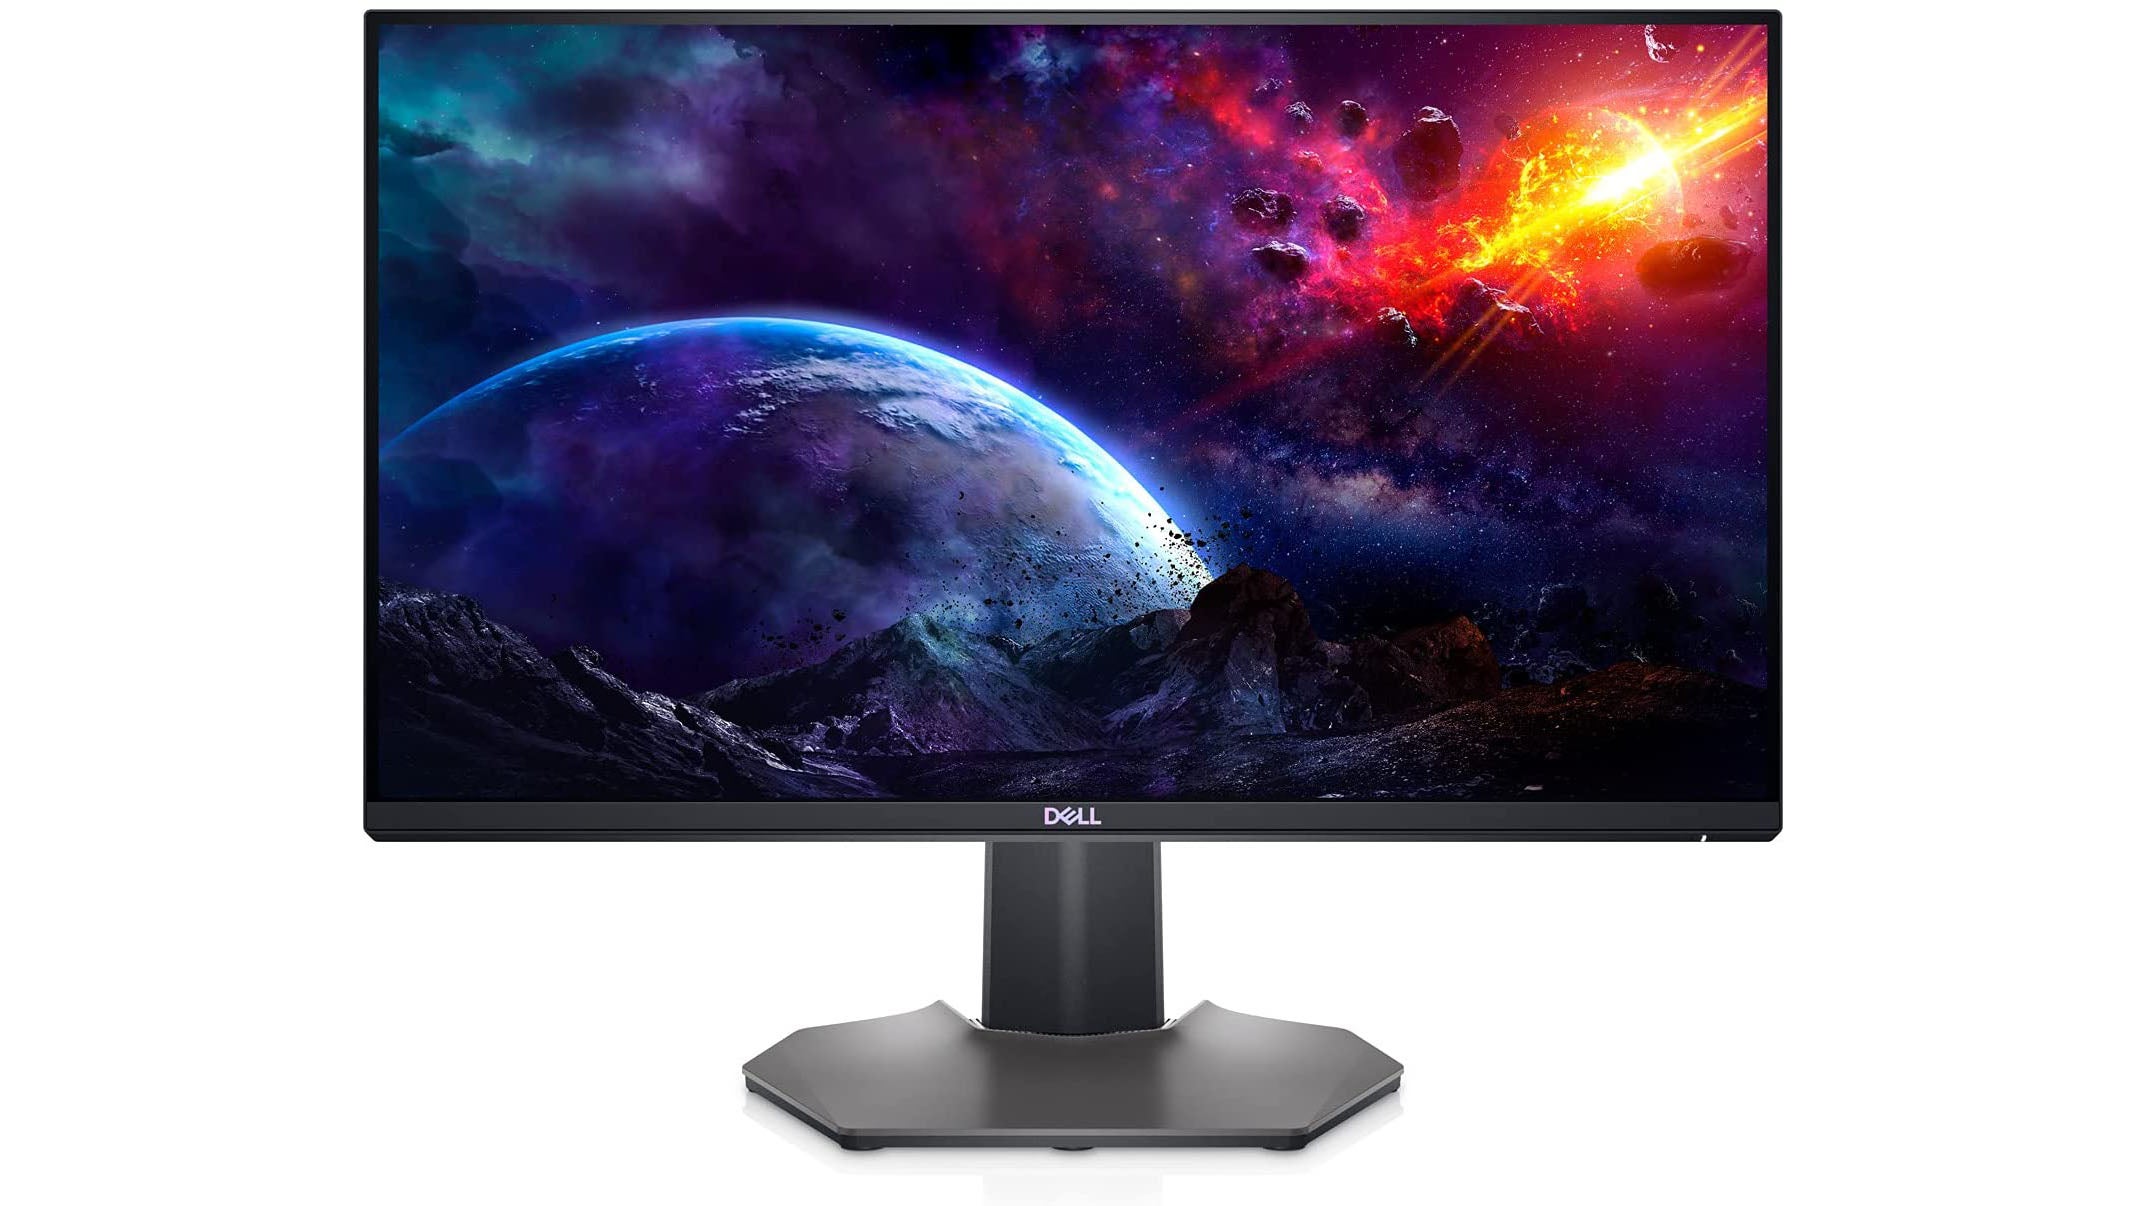 a photo of the dell s2522hg 240hz gaming monitor, showing a modern 25-inch display